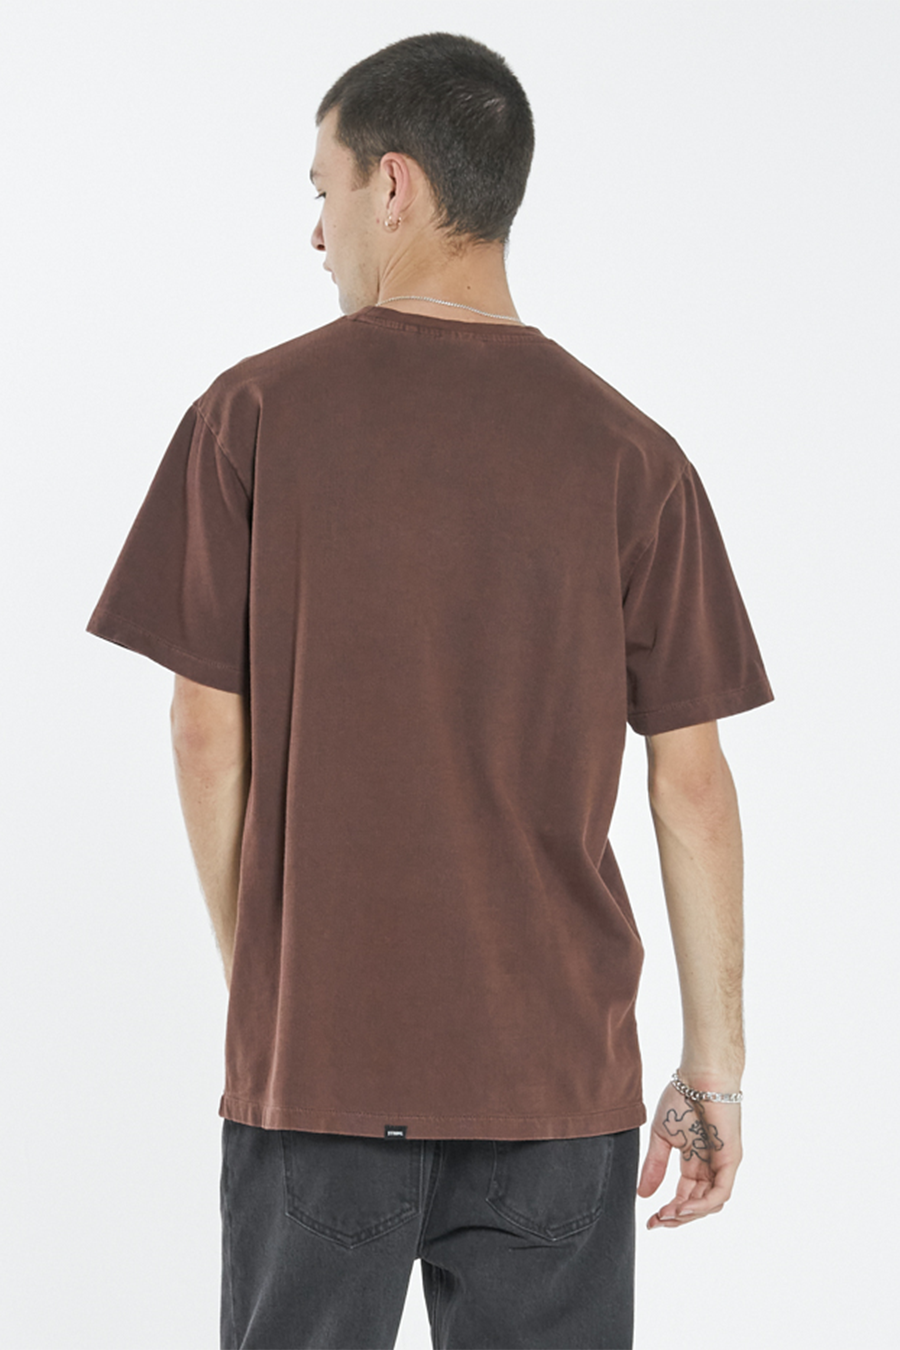 Liste Embro Merch Tee | Washed Cocoa - Main Image Number 2 of 2